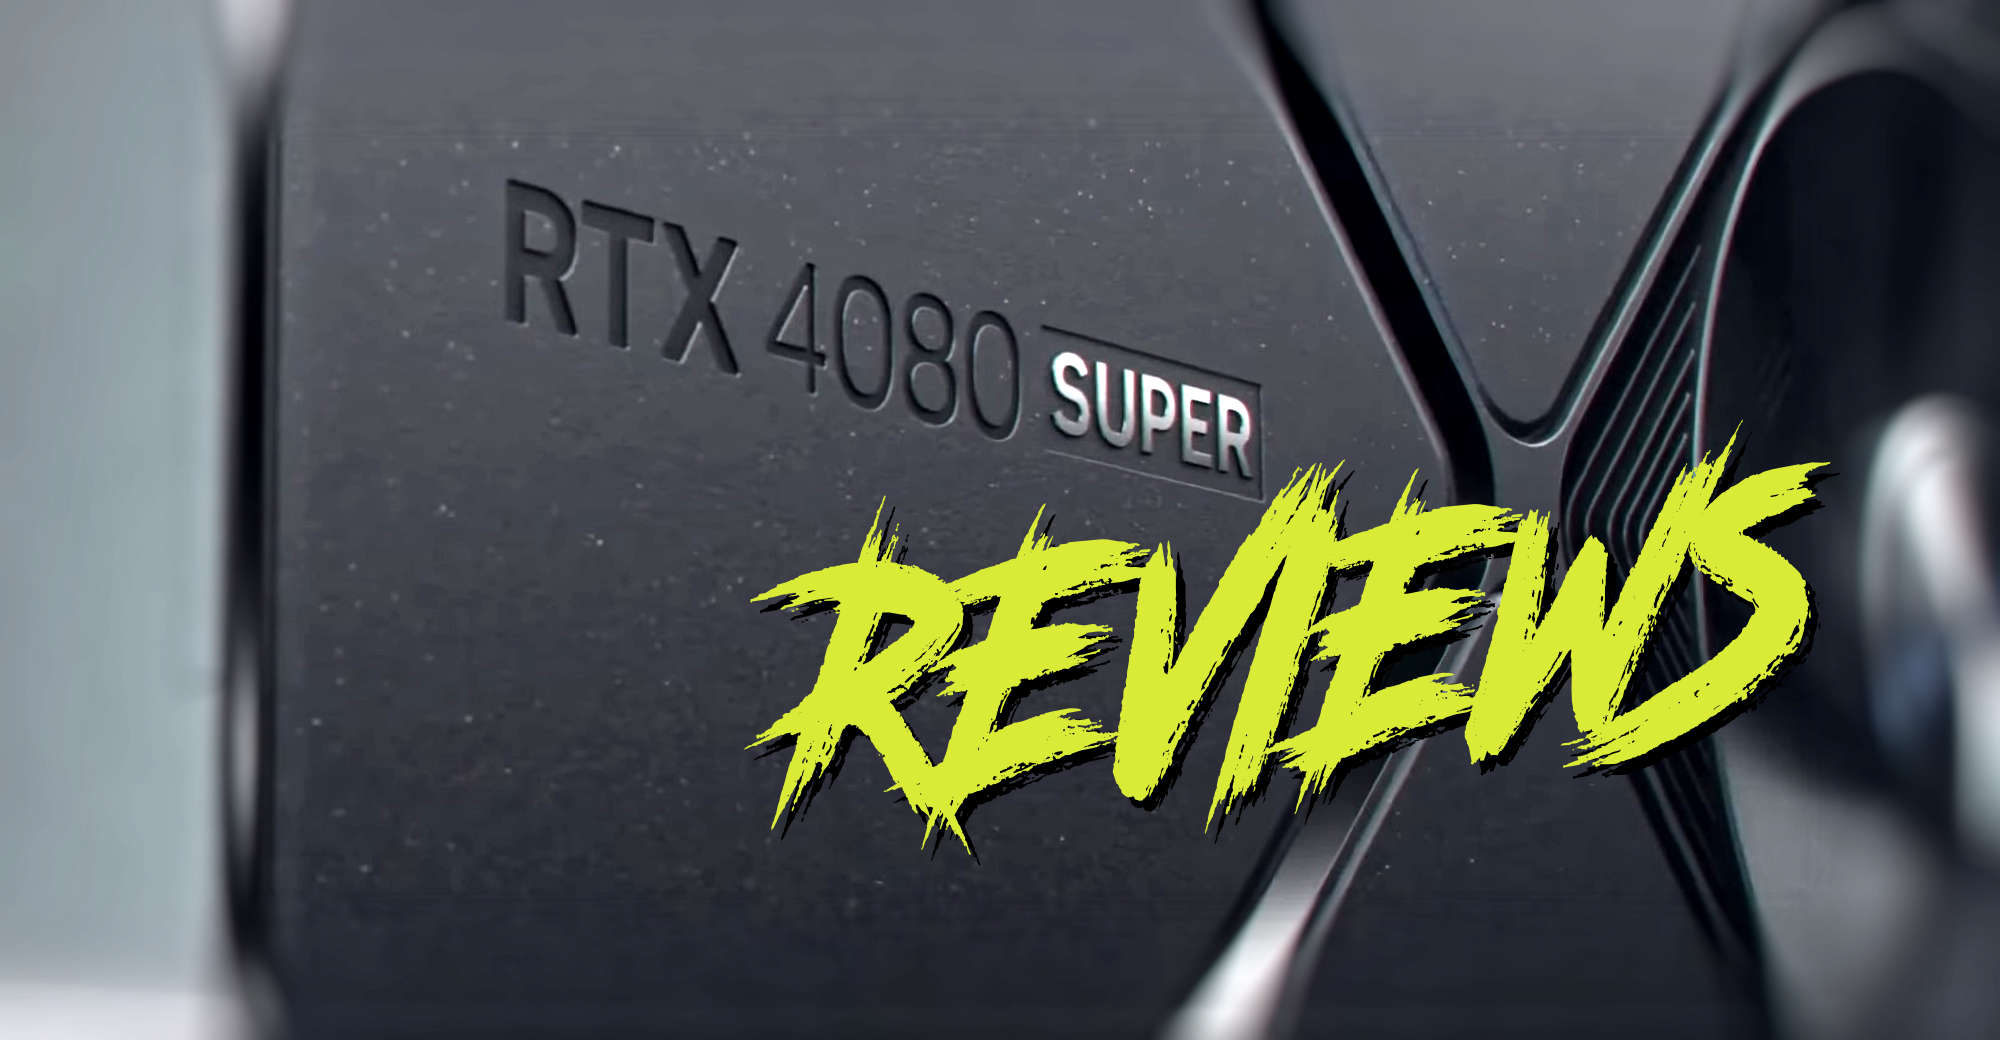 NVIDIA GeForce RTX 4080 SUPER Graphics Cards Review Roundup